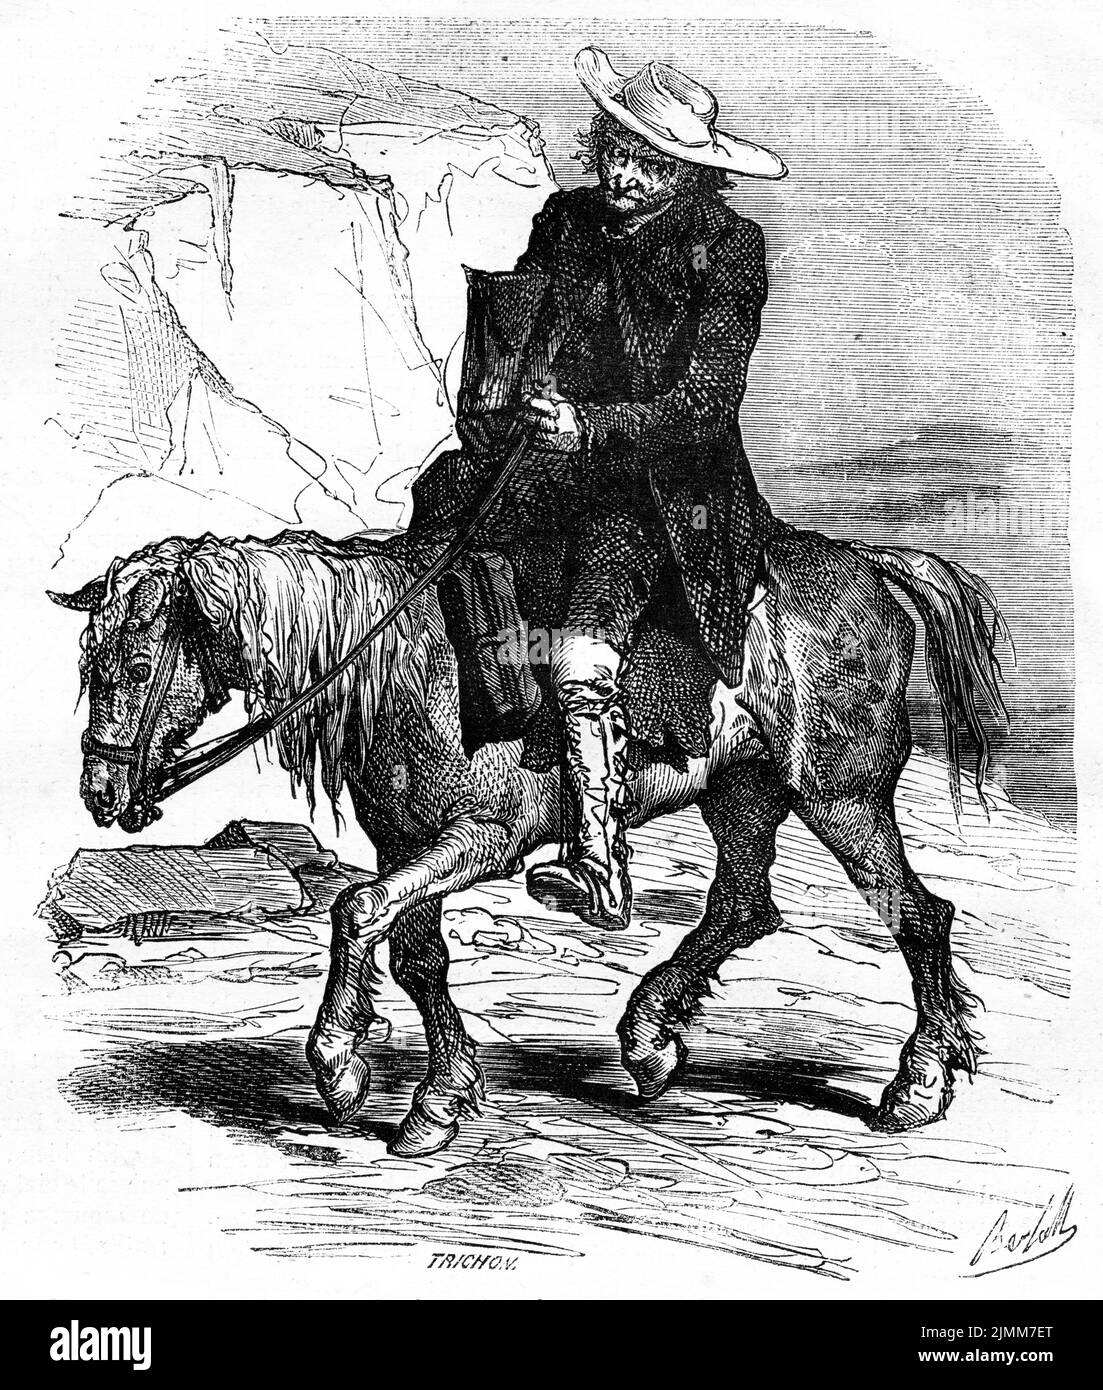 Engraving of a weary-looking man riding a horse, circa 1890 Stock Photo